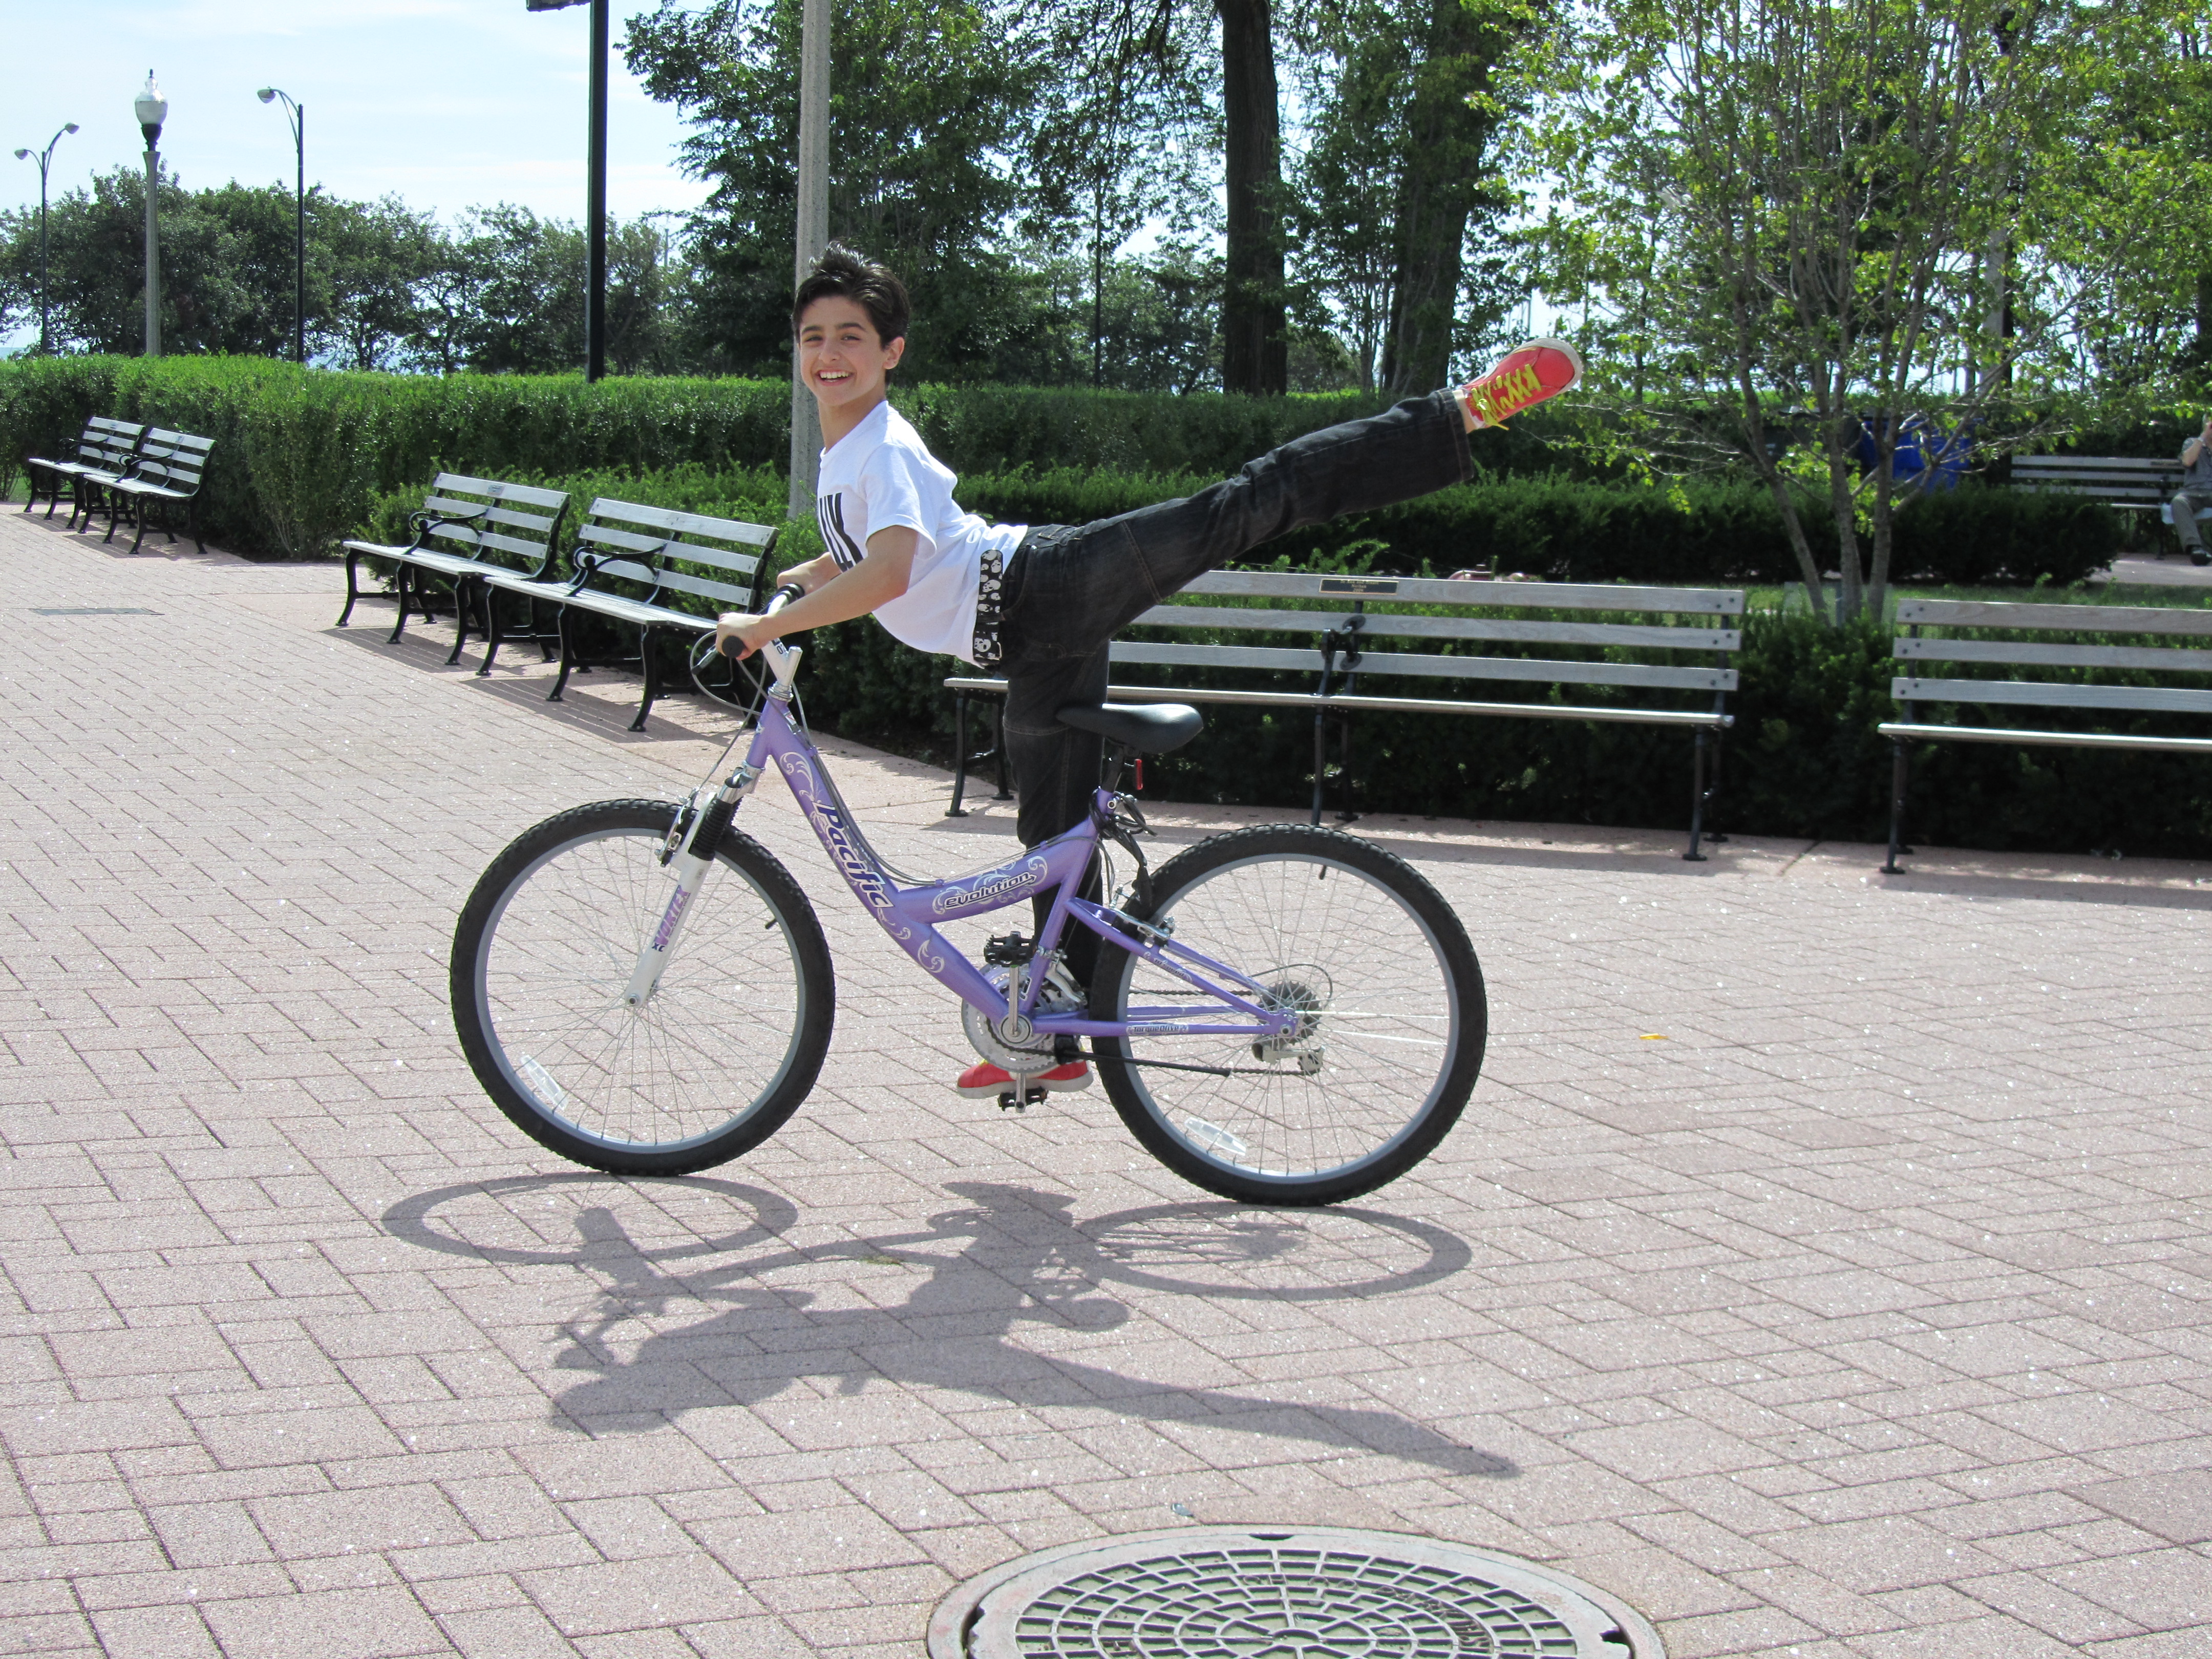 Giuseppe Riding his Bike in Chicago